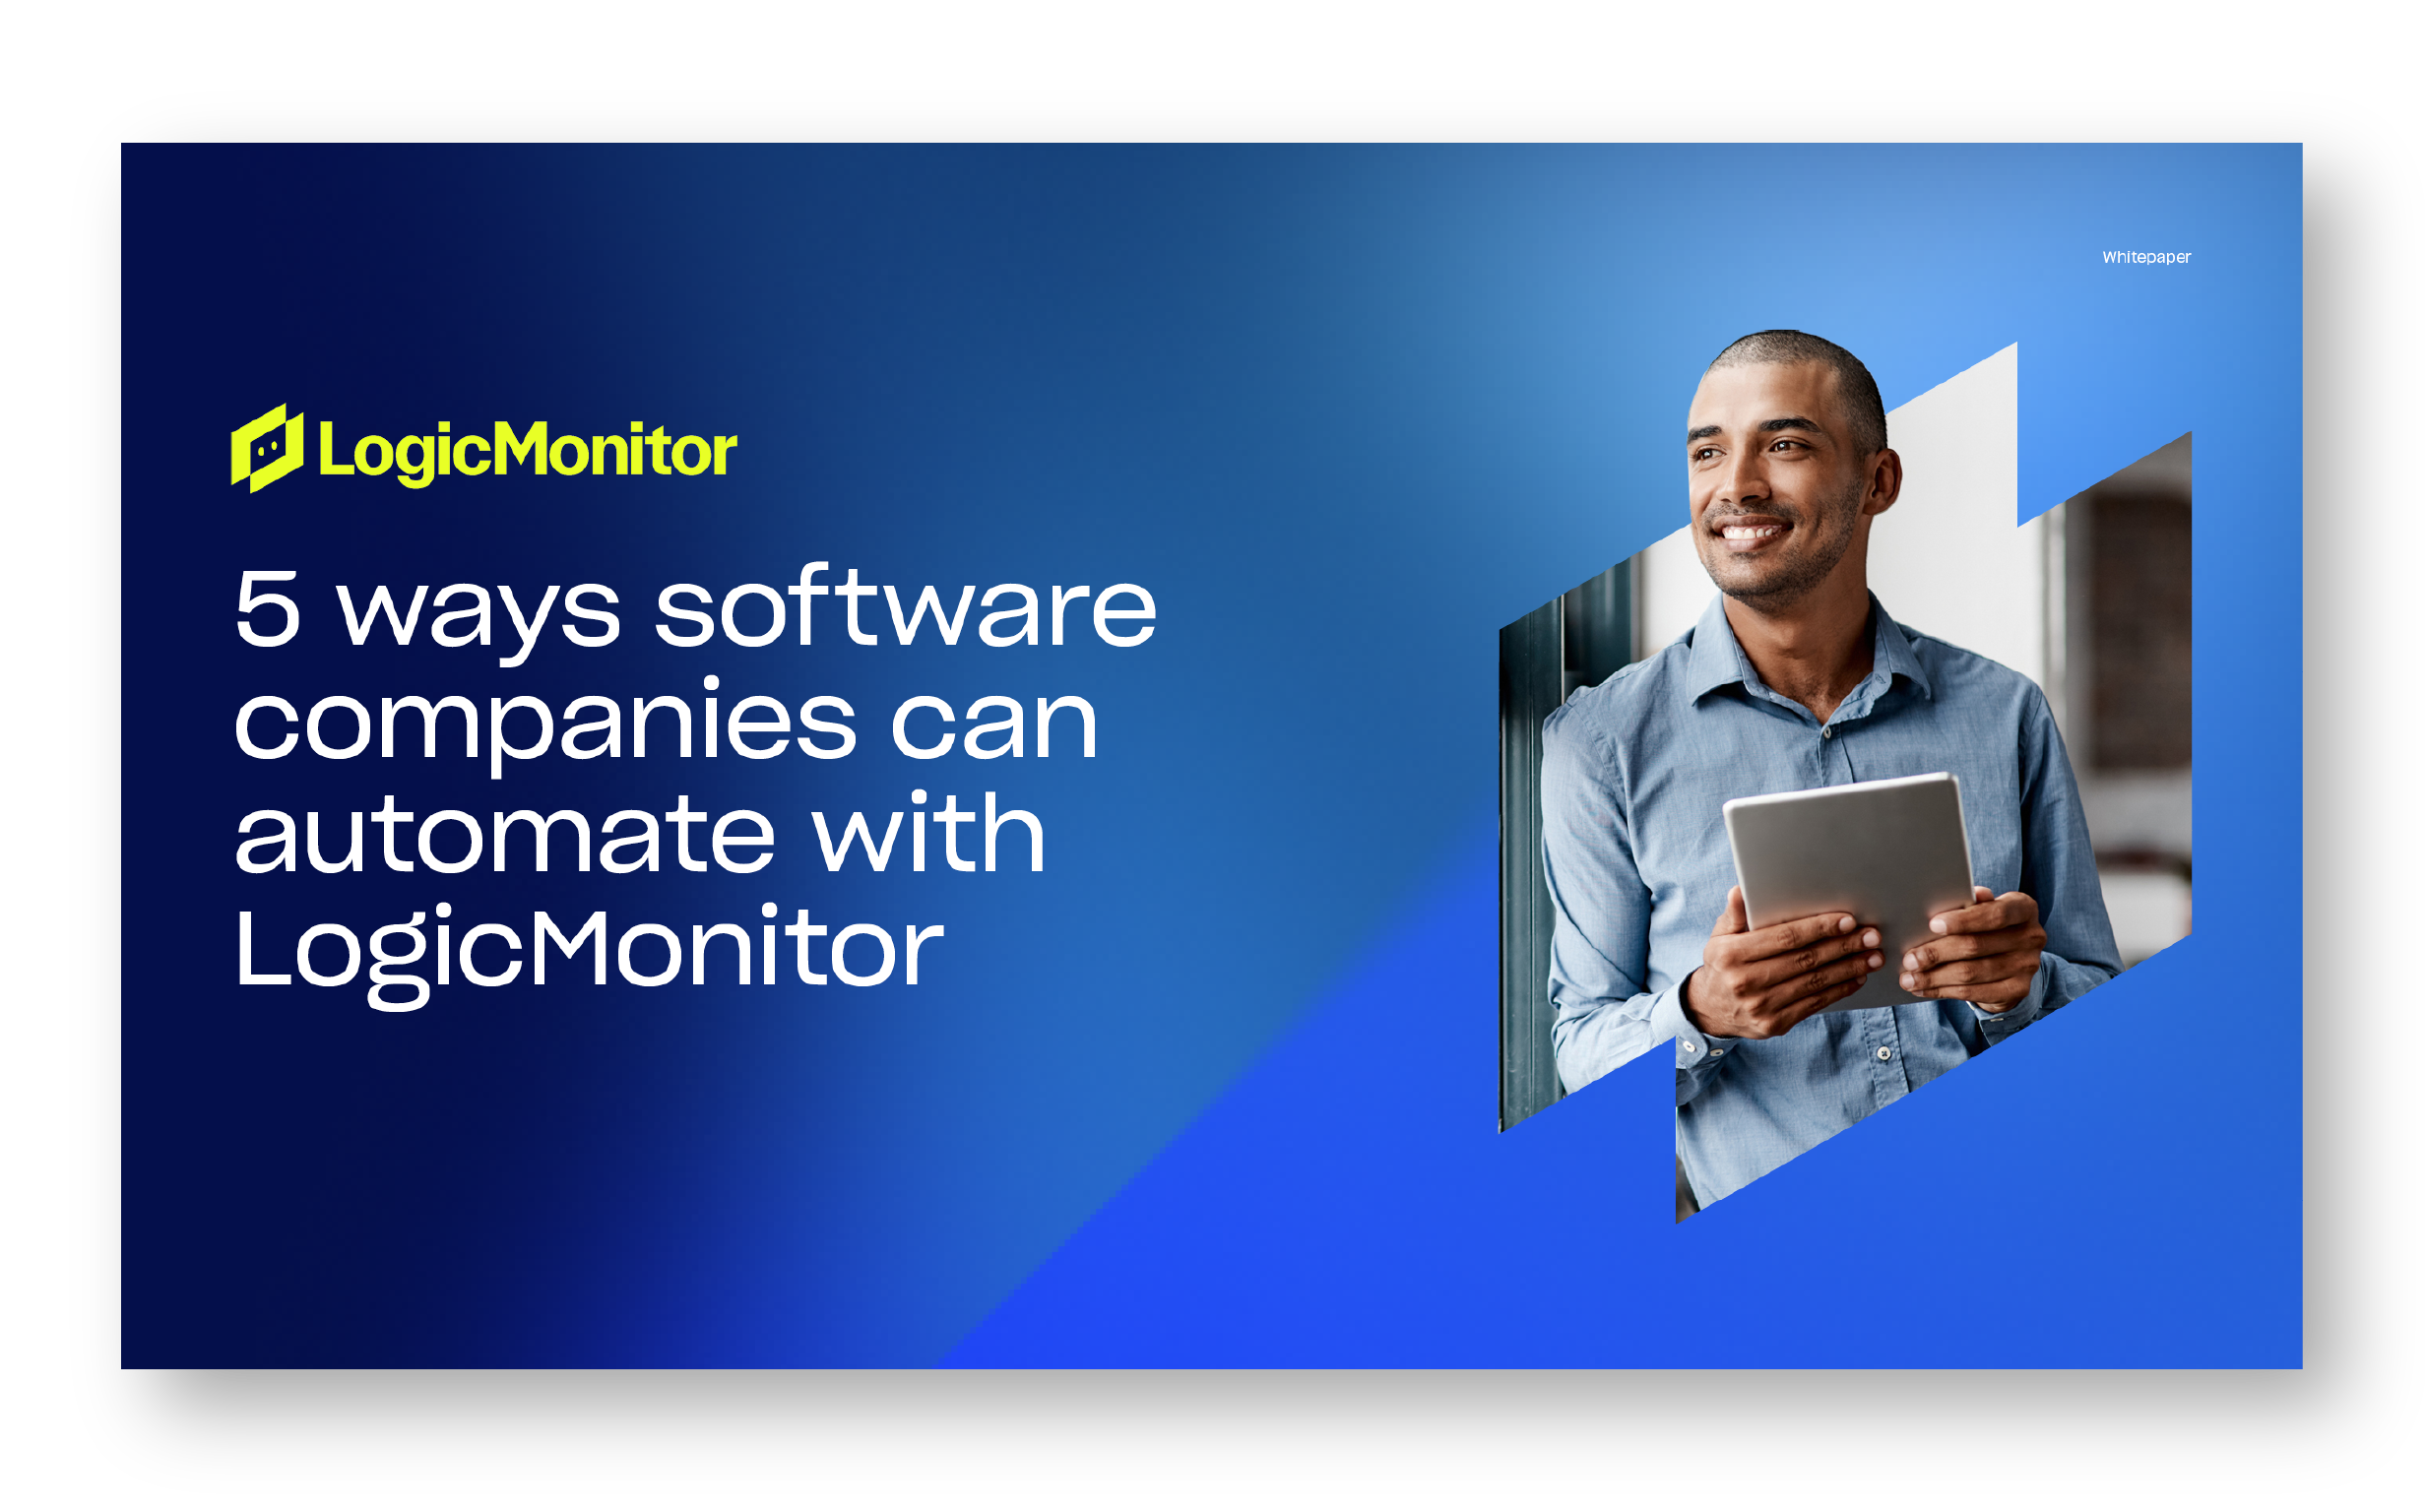 5 ways software companies can automate with LogicMonitor